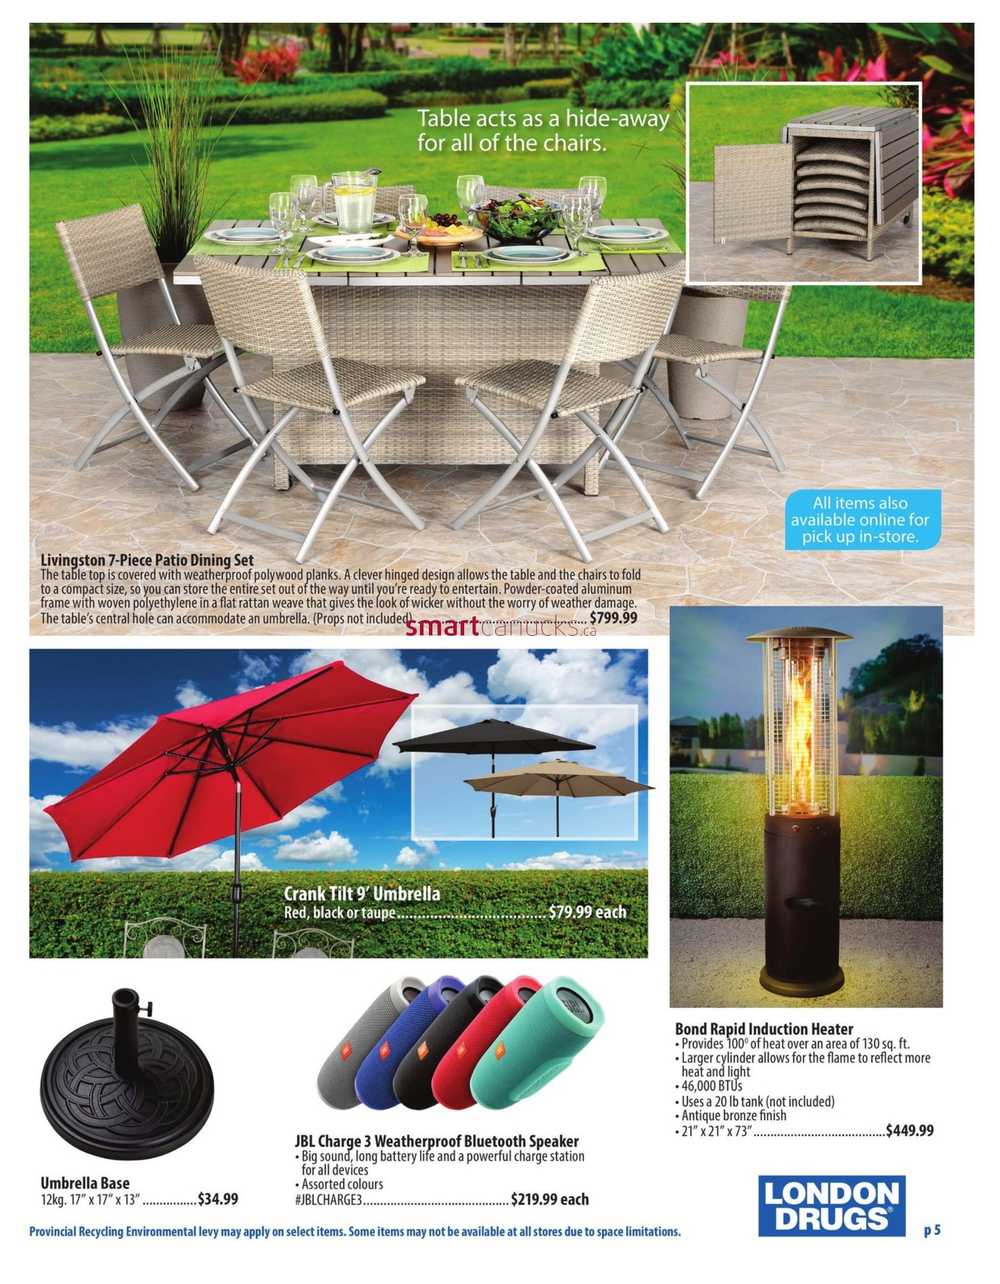 London Drugs Outdoor Living Catalogue April 14 To July 15